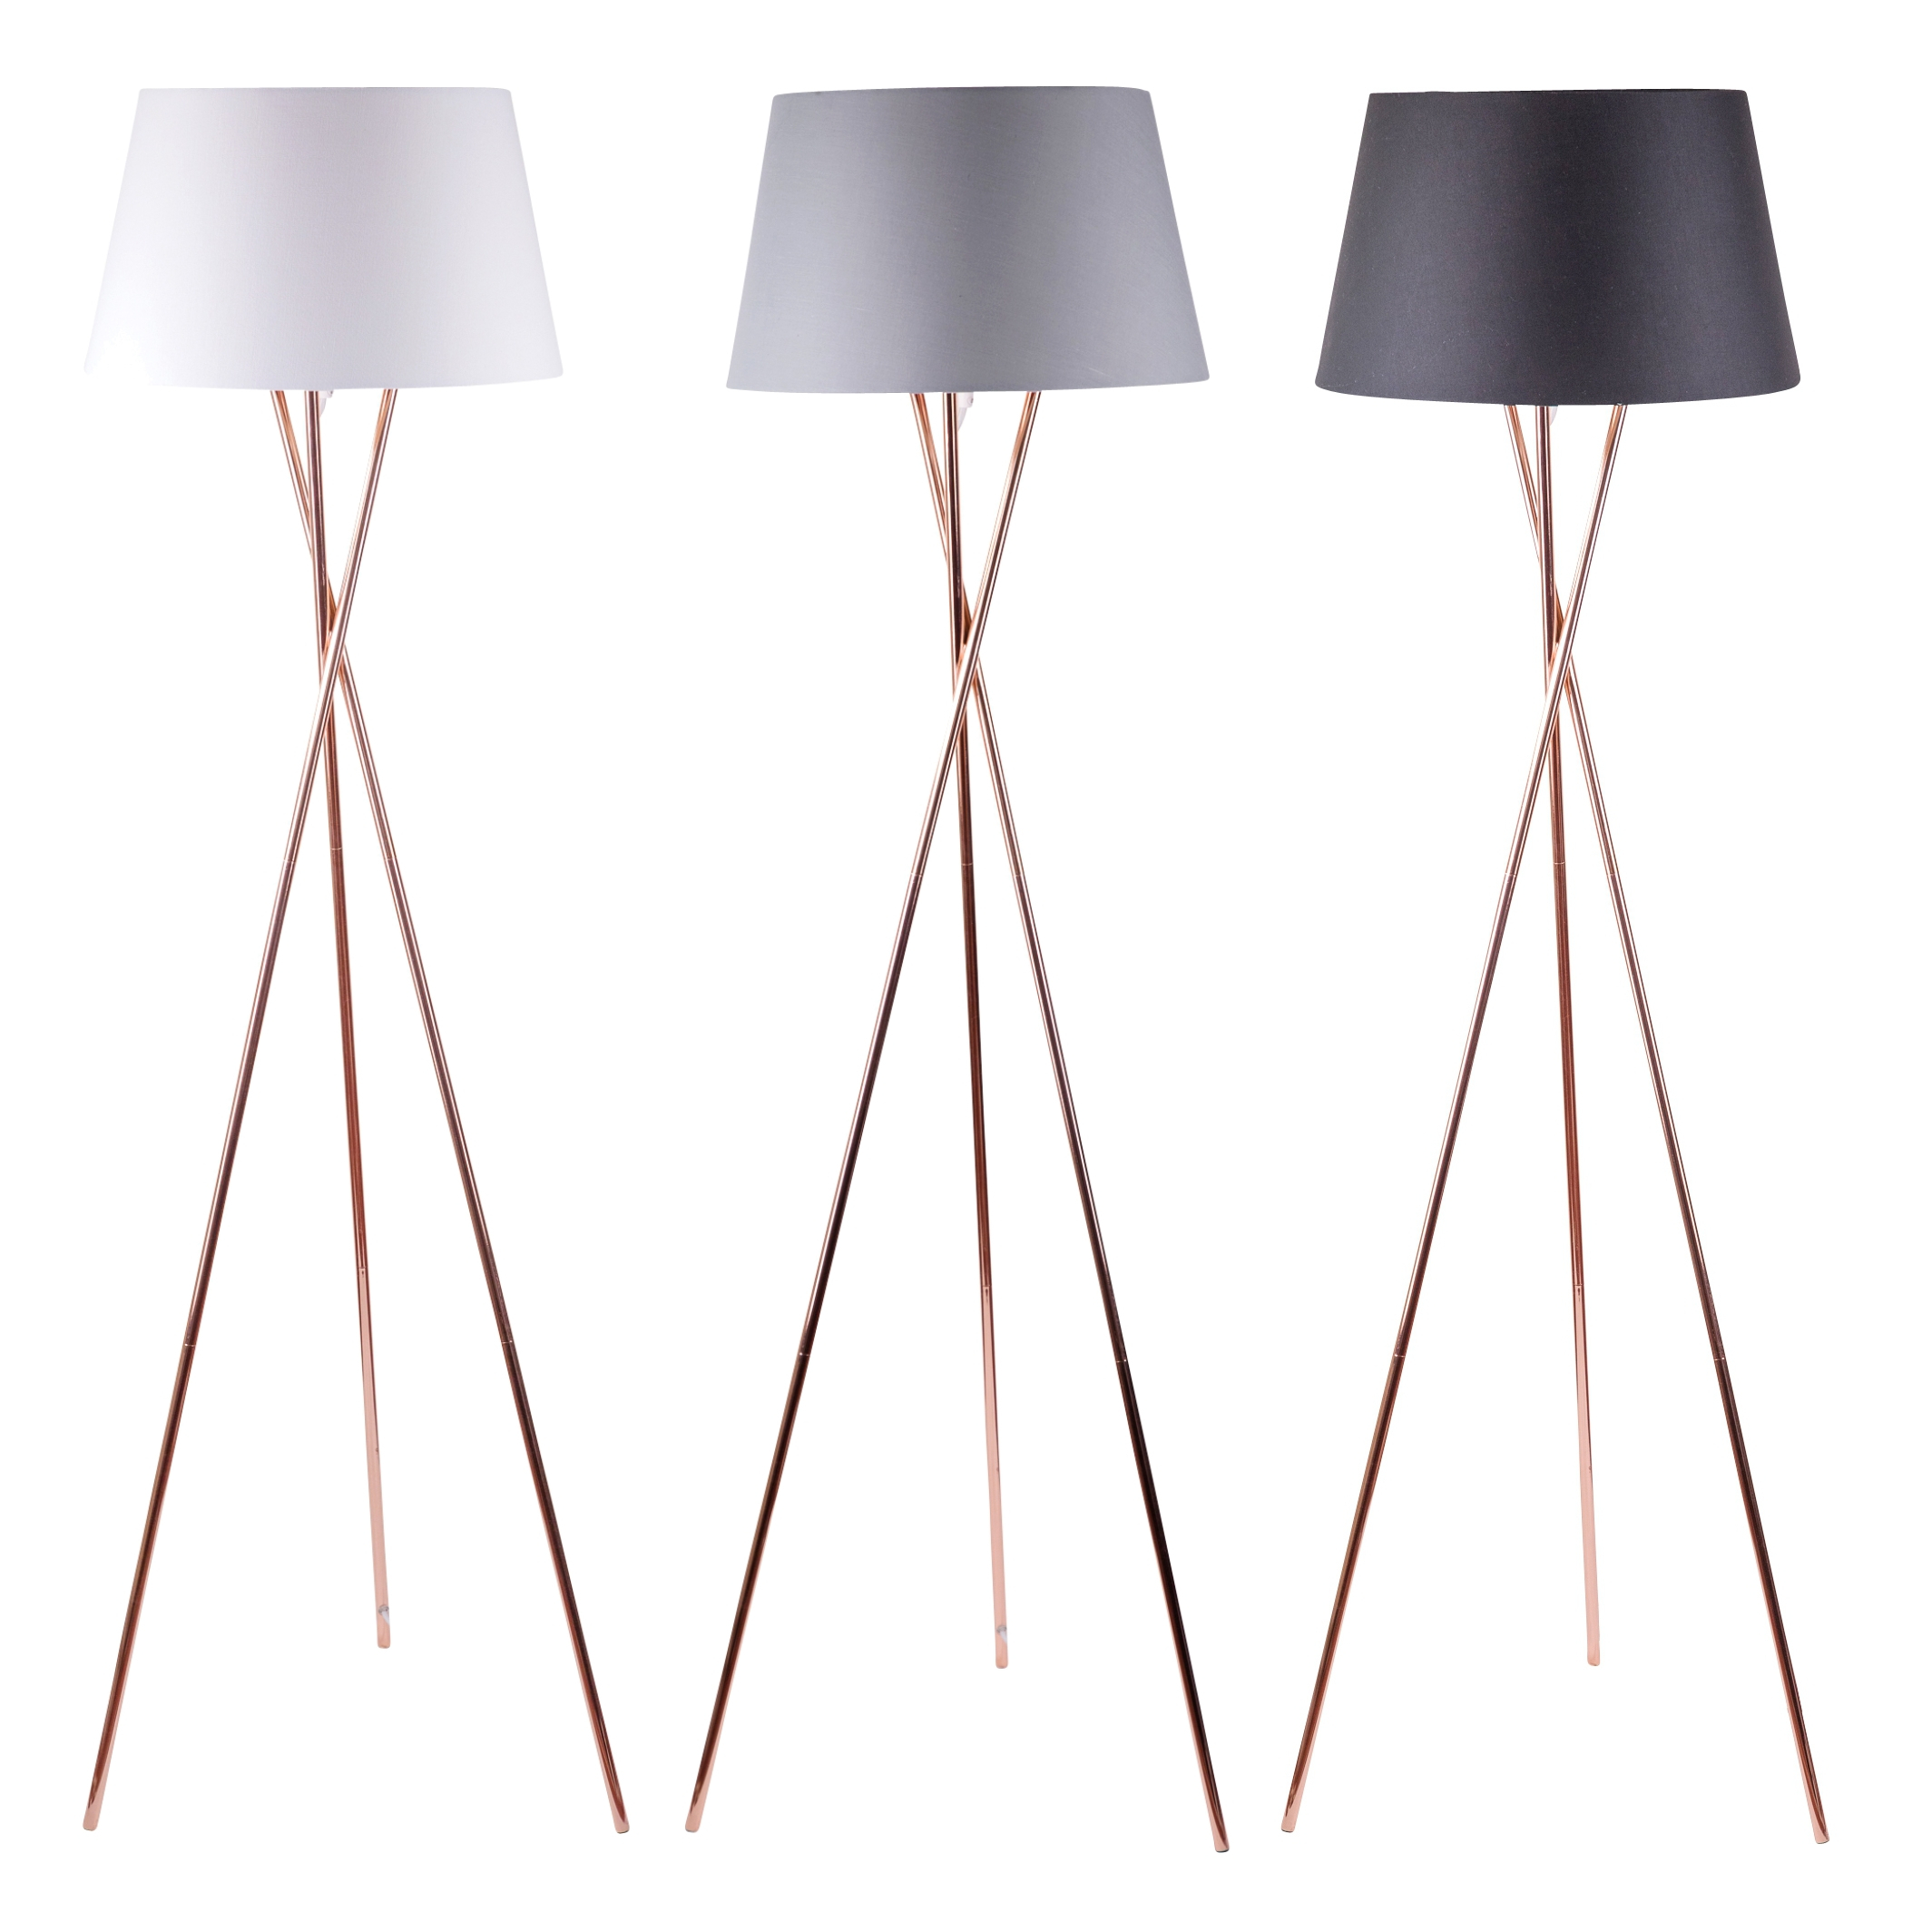 Details About Modern Copper Tripod Floor Lamp Standard Light With Grey White Or Black Shade regarding dimensions 2129 X 2129